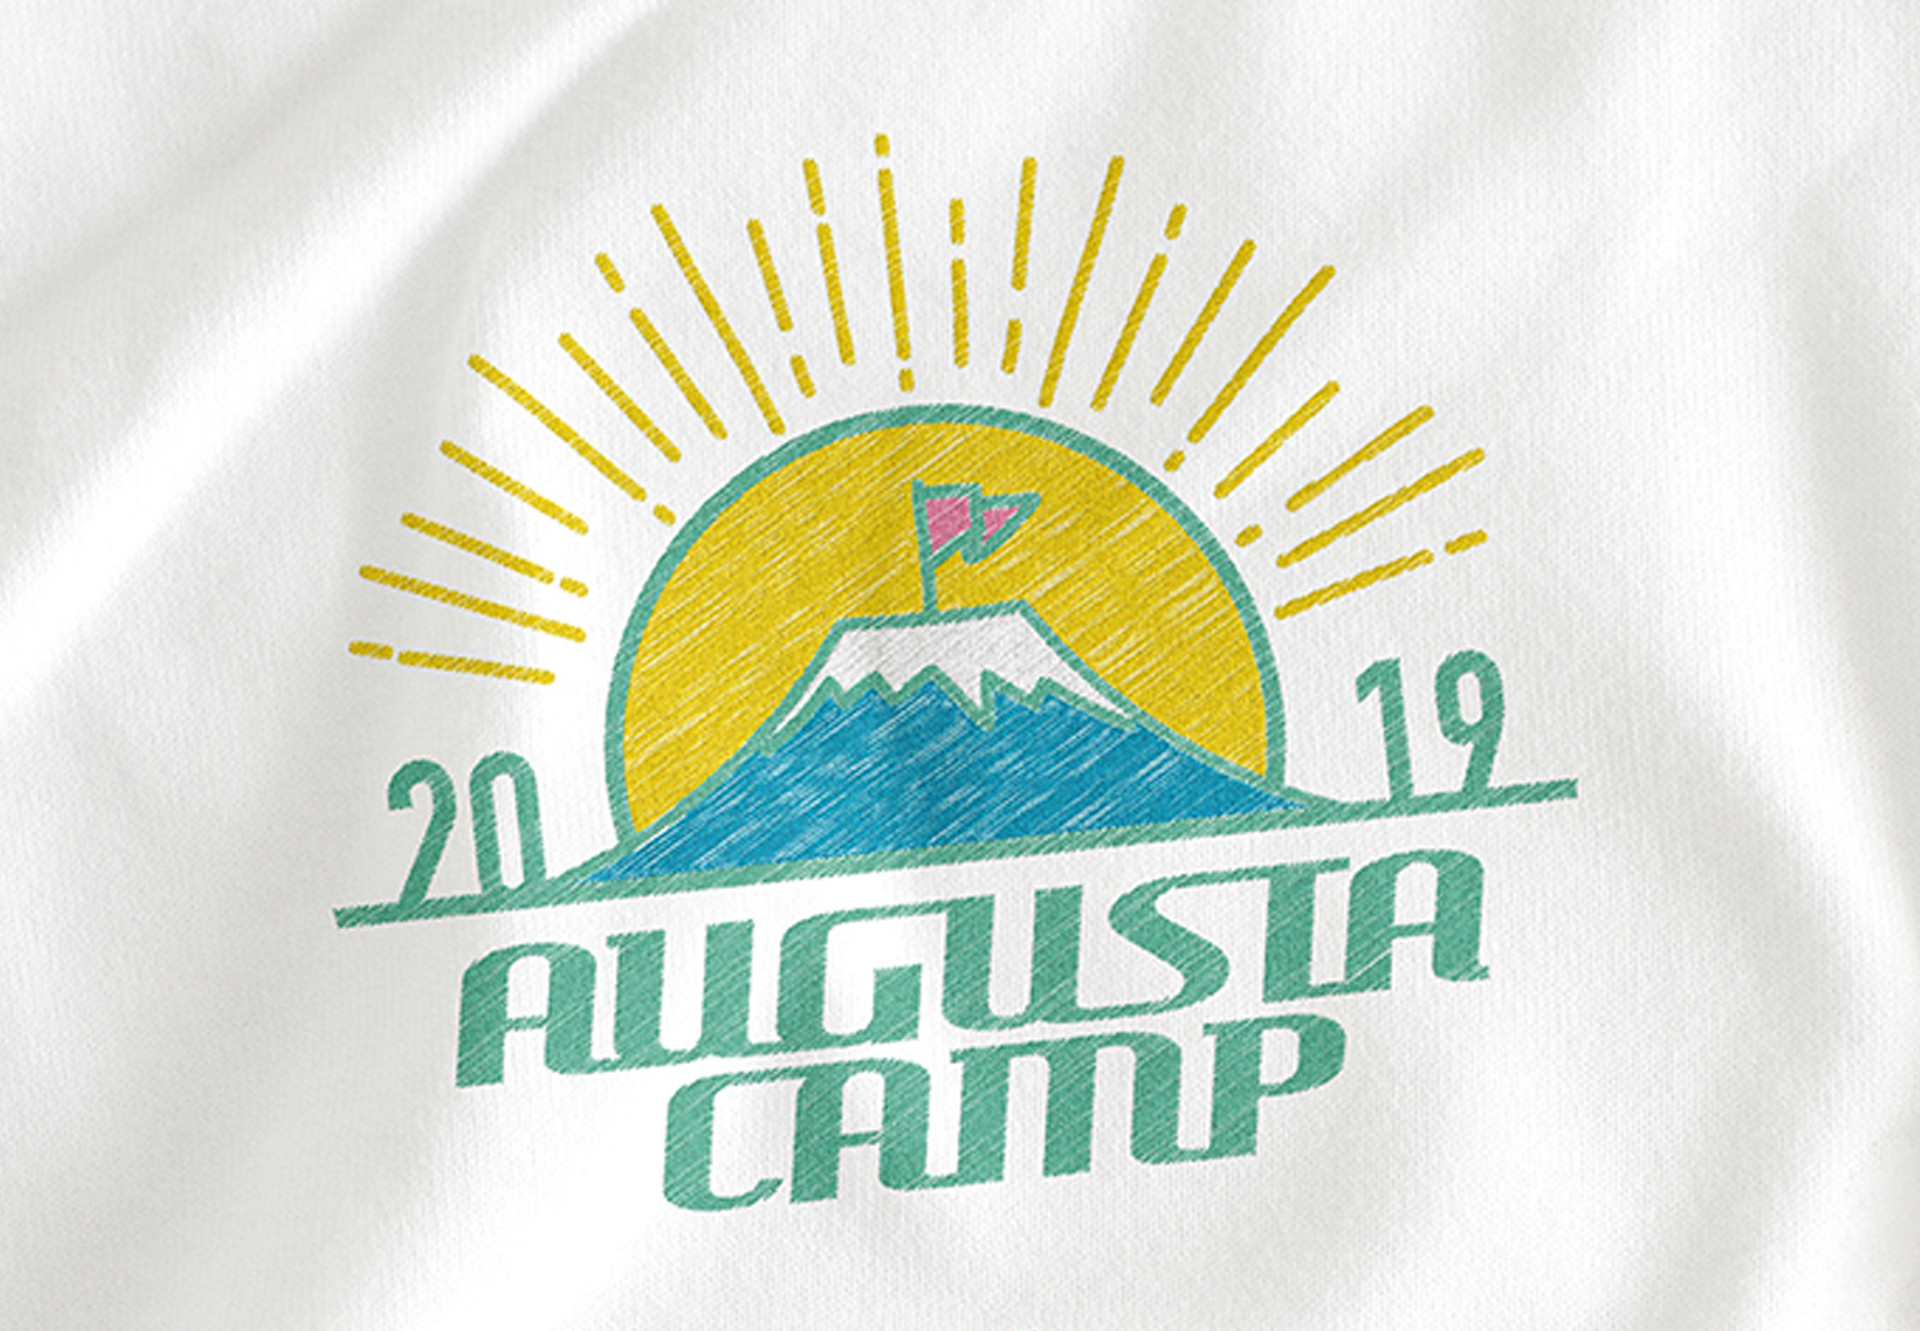 Augusta Camp 2019 + SHORT FILM "I and you" included "Fukubiki ticket" lottery results announced! !!